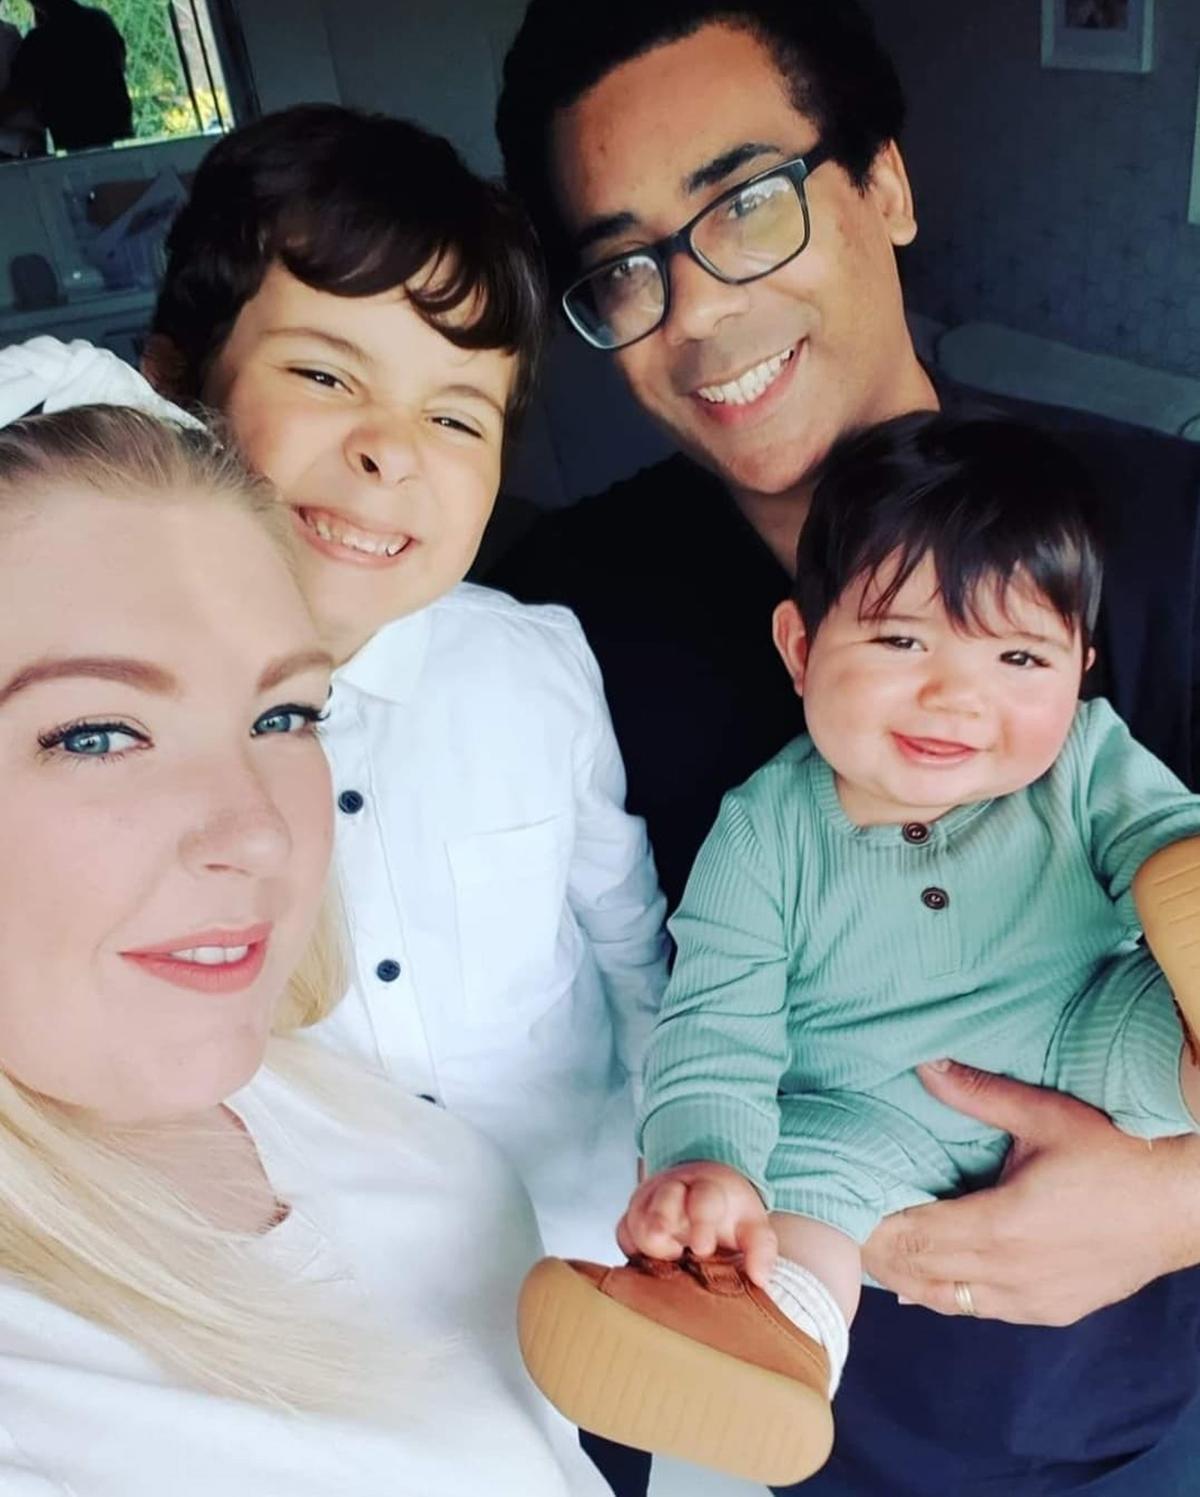 Vicky and her husband, Simon, with their two sons, Roman and baby Reign. (Courtesy of Caters News)